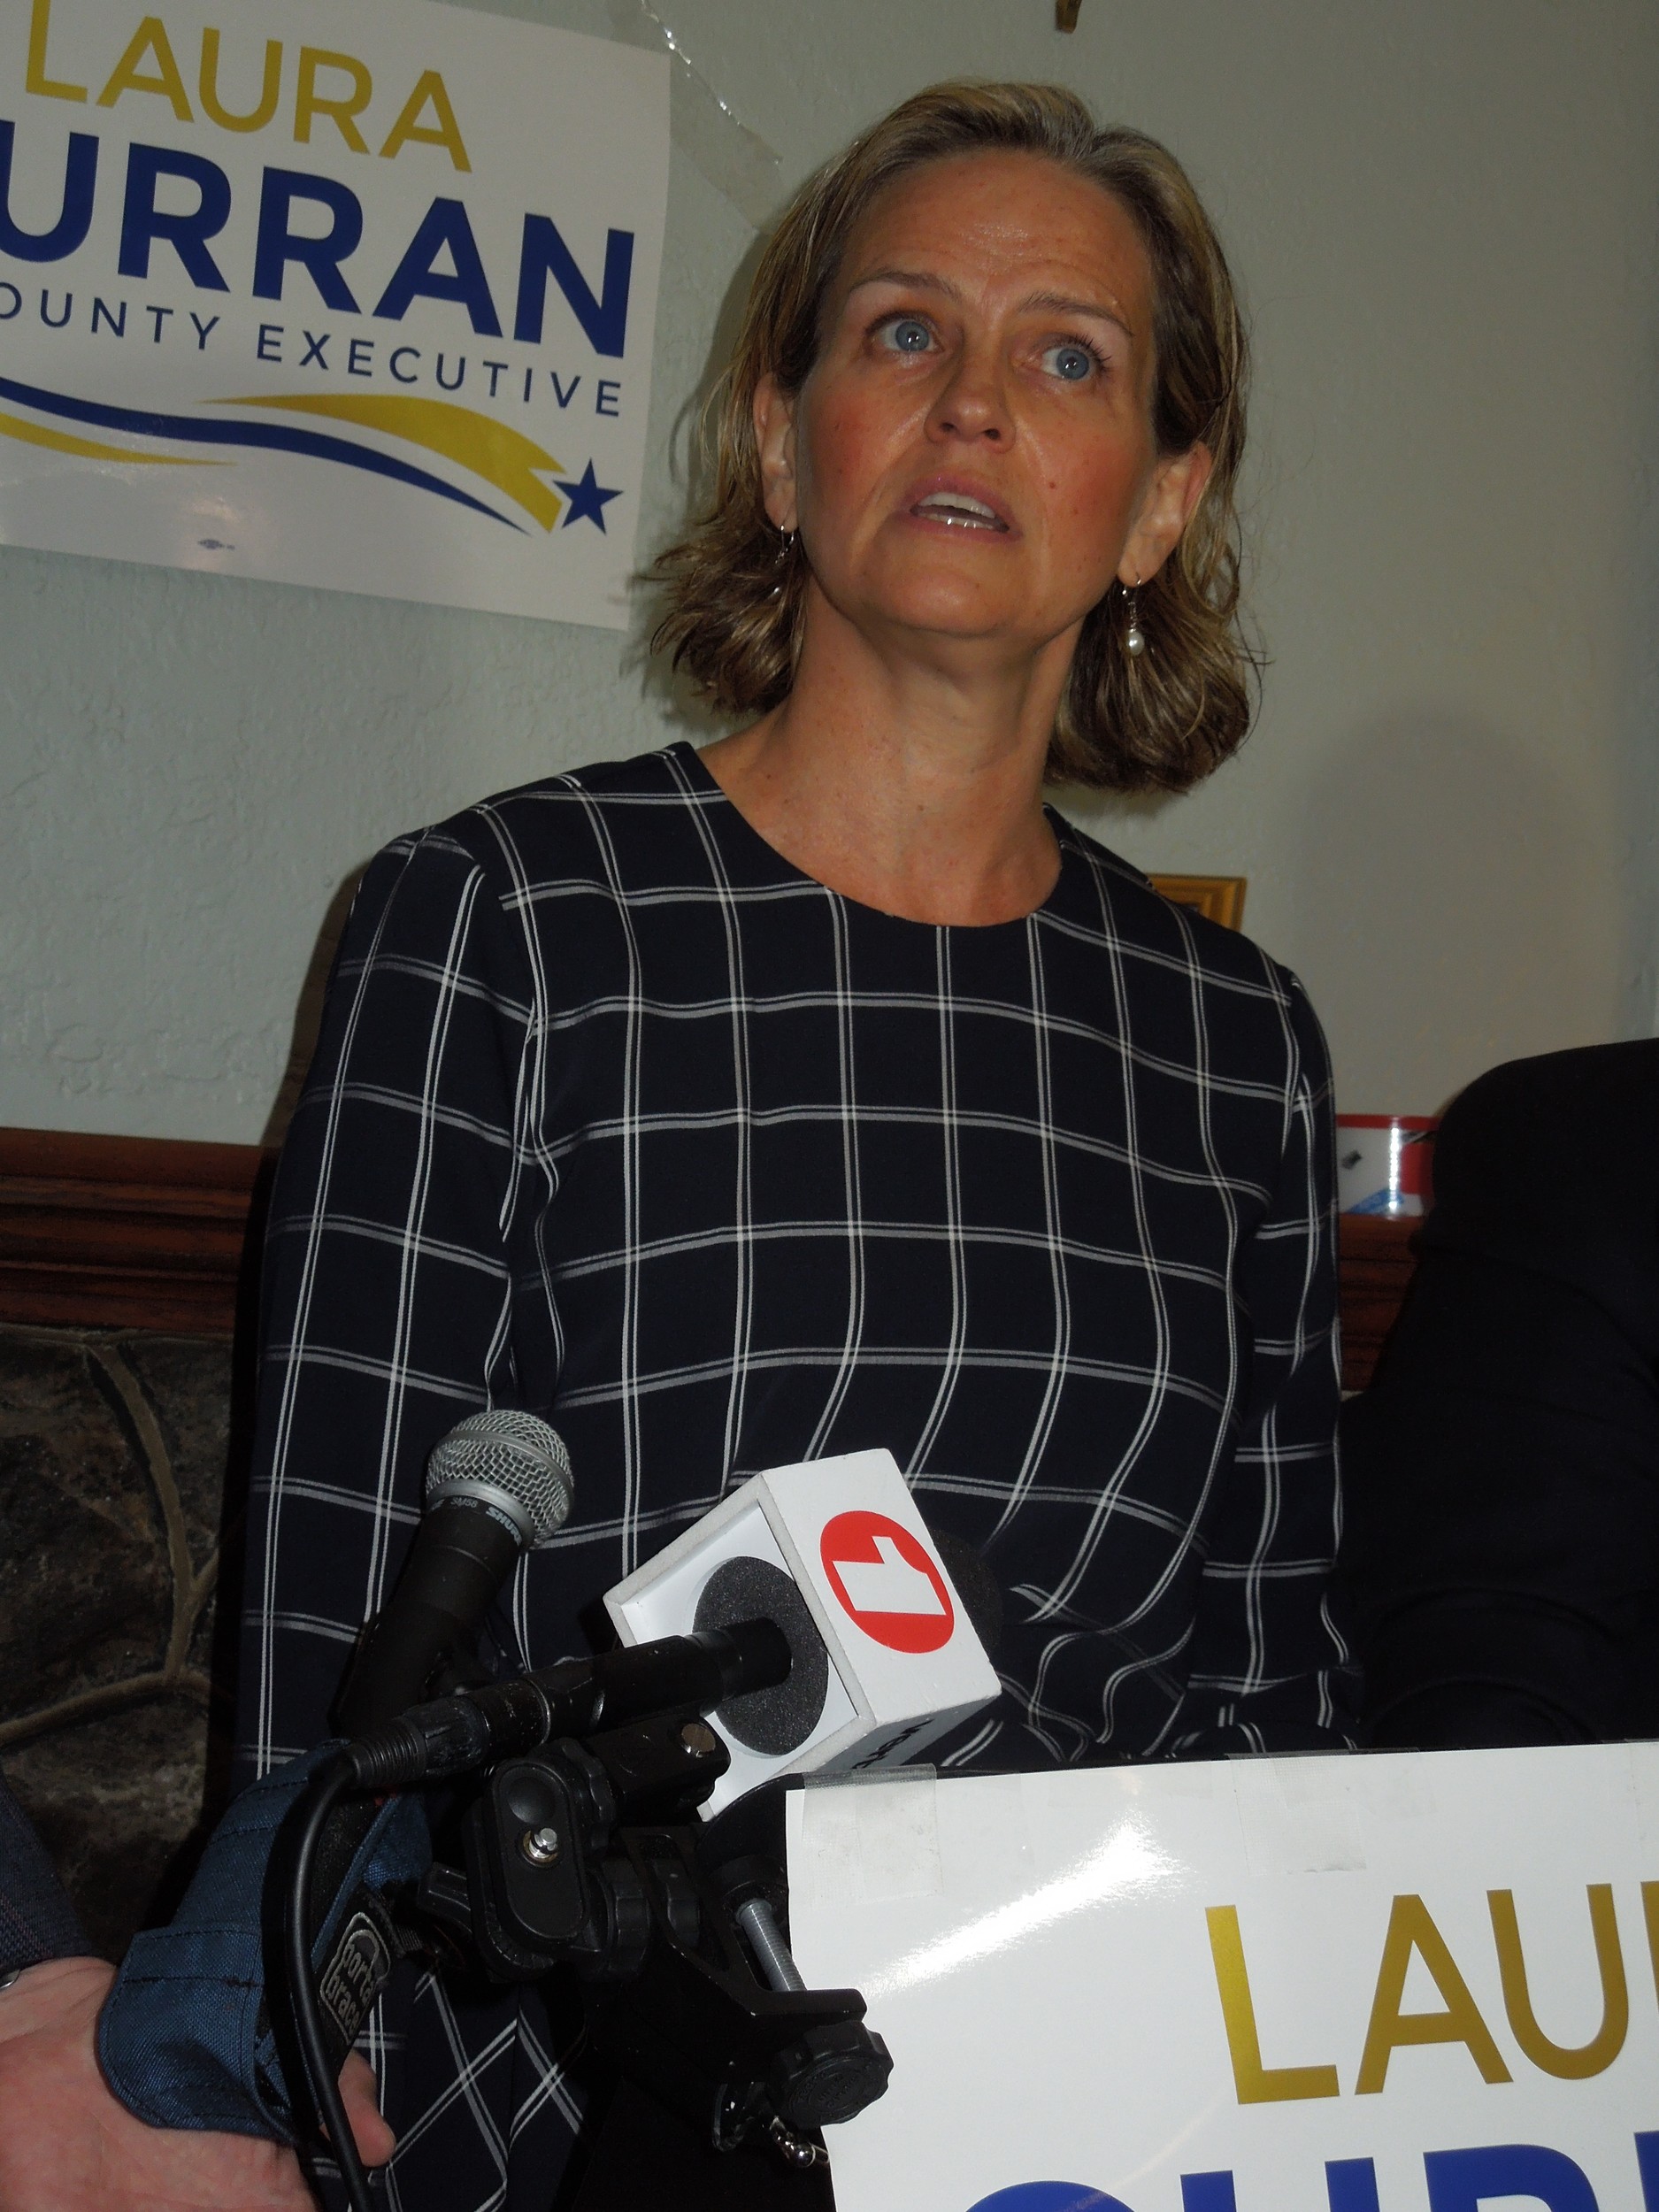 The Nassau County Democratic Committee is backing County Legislator Laura Curran for county executive.